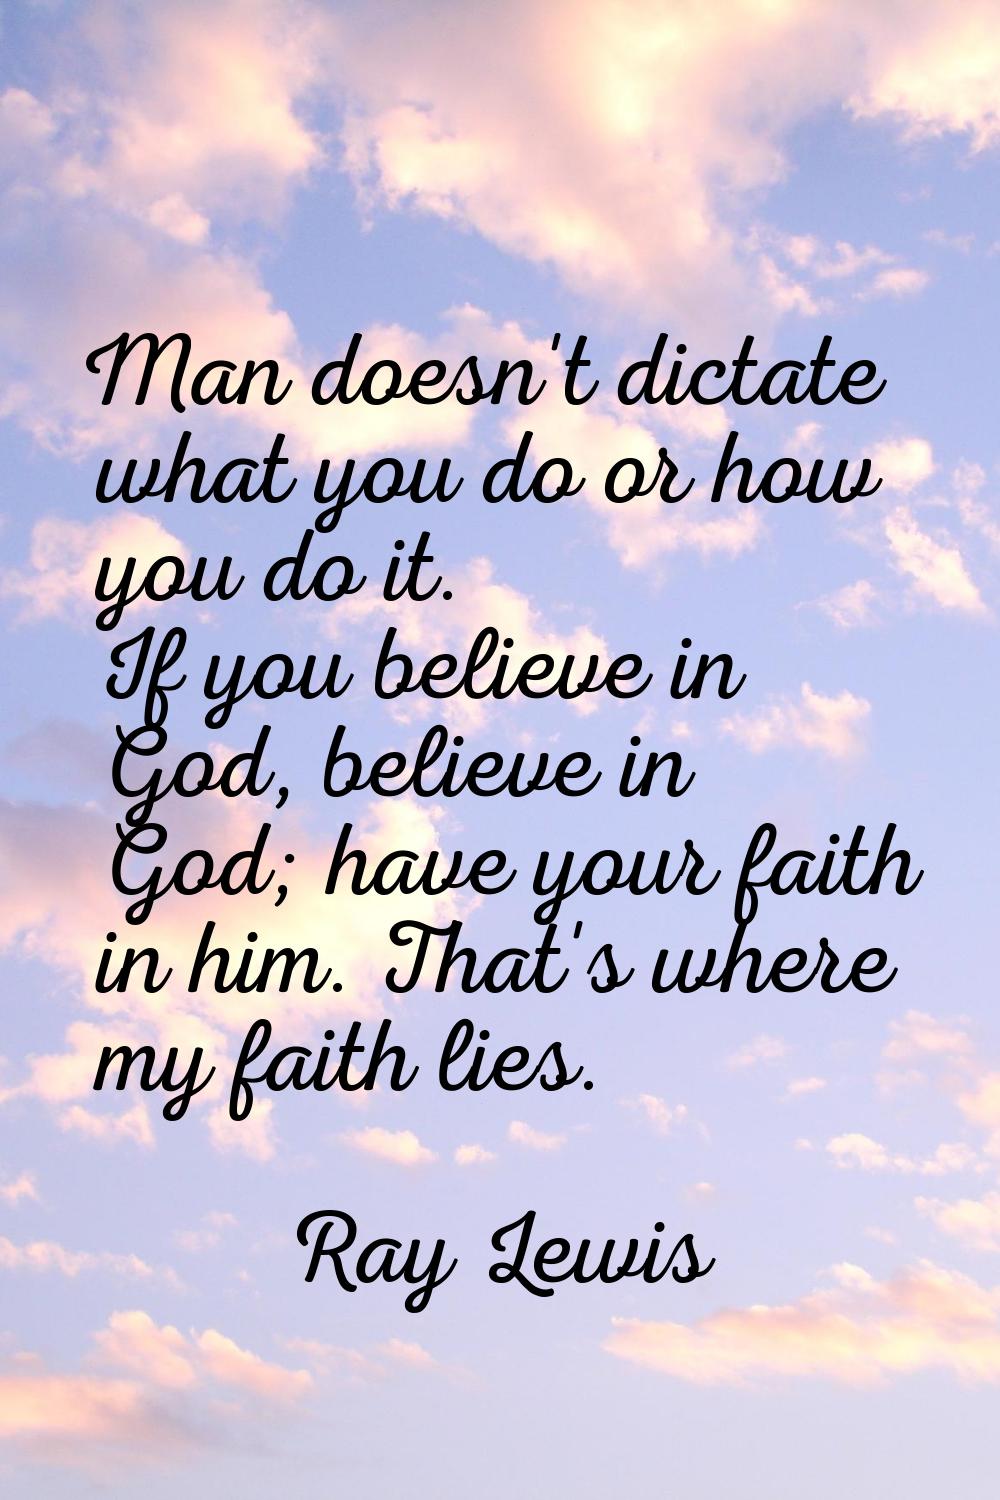 Man doesn't dictate what you do or how you do it. If you believe in God, believe in God; have your 